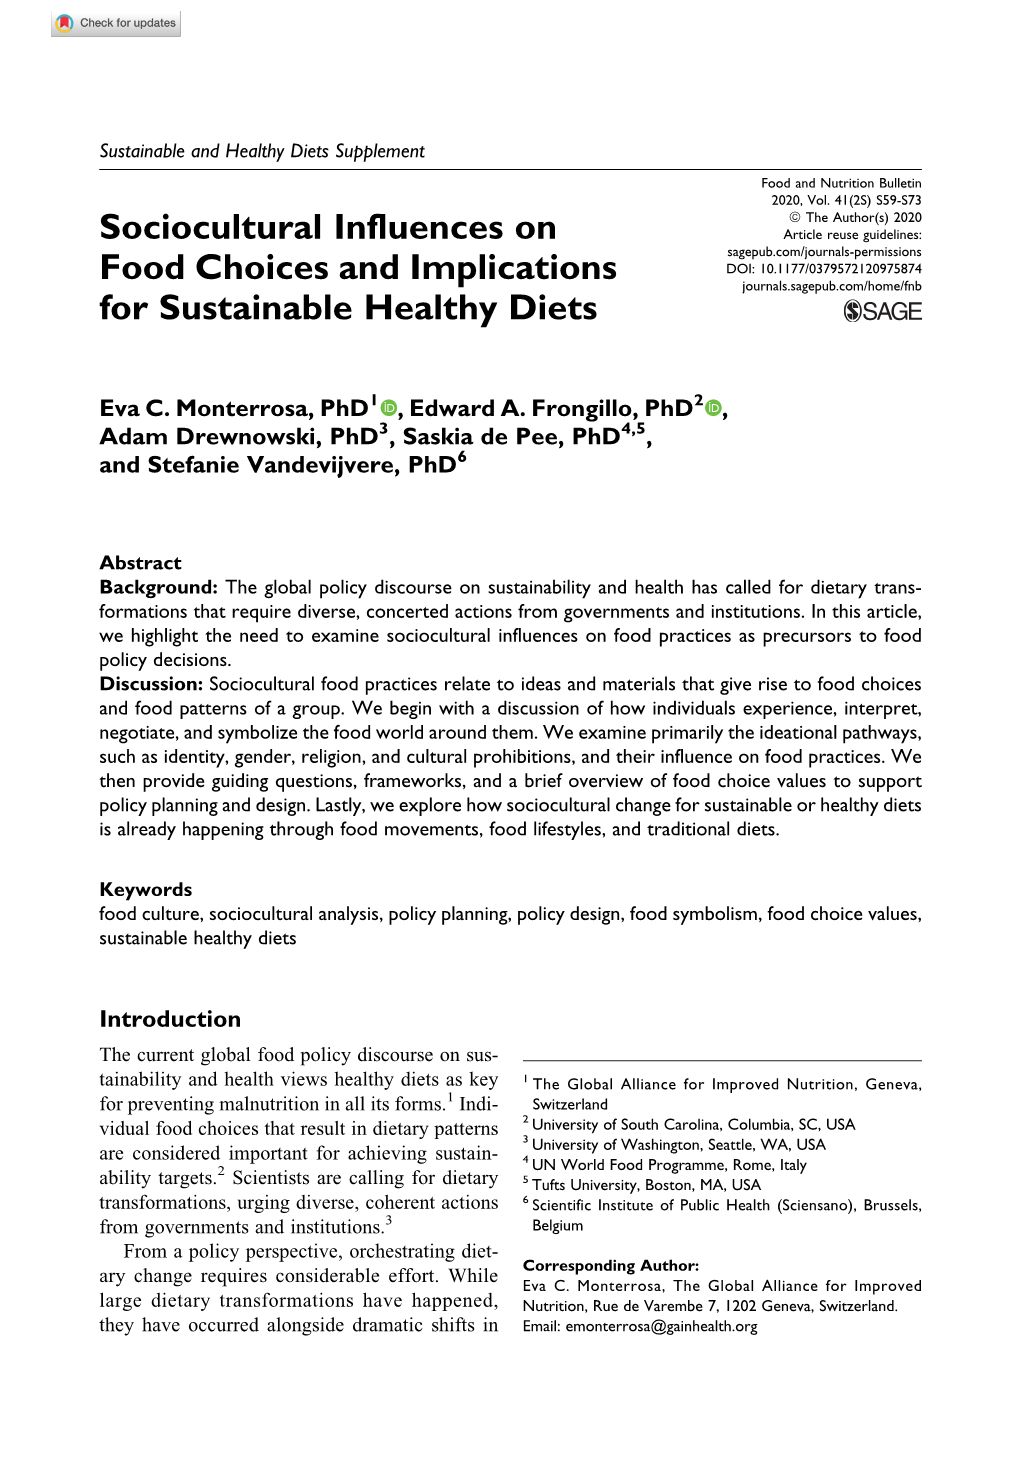 Sociocultural Influences on Food Choices and Implications For